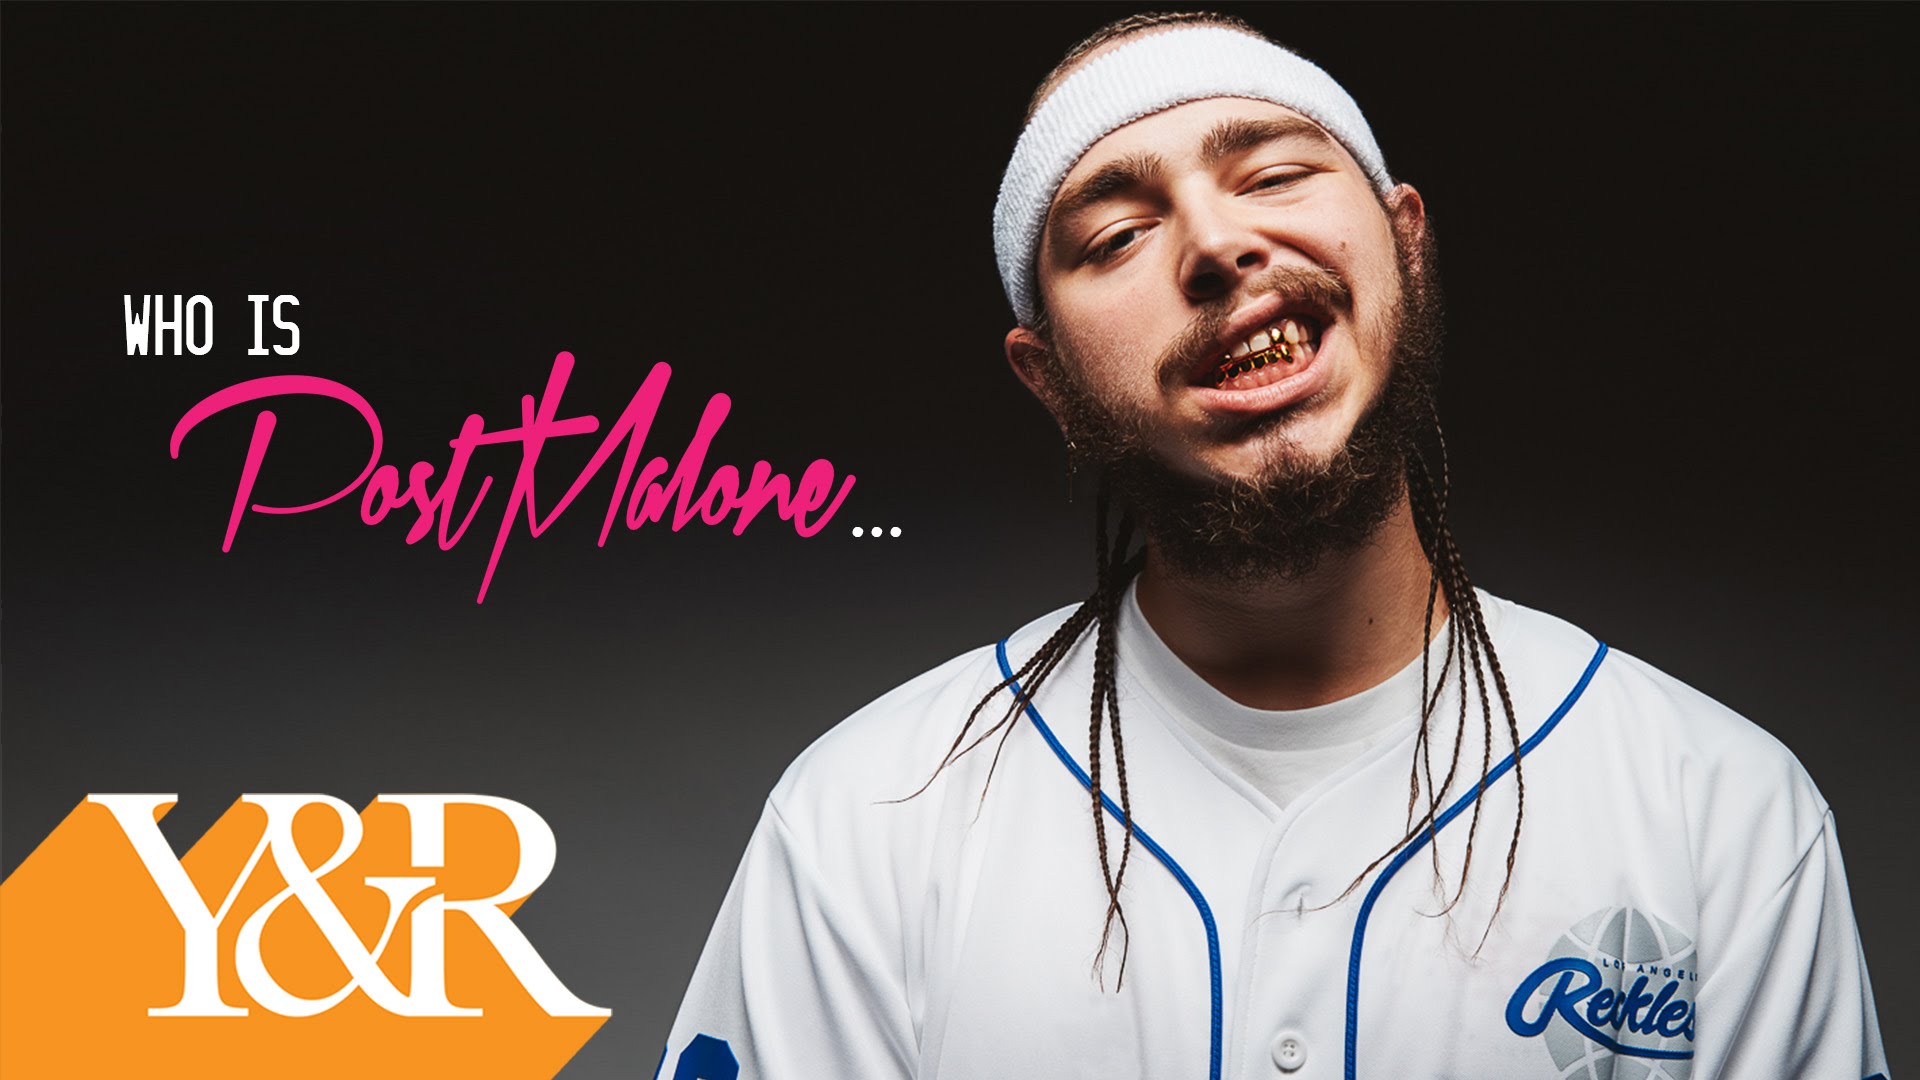 Y&R Presents: Who Is Post Malone? (Video)